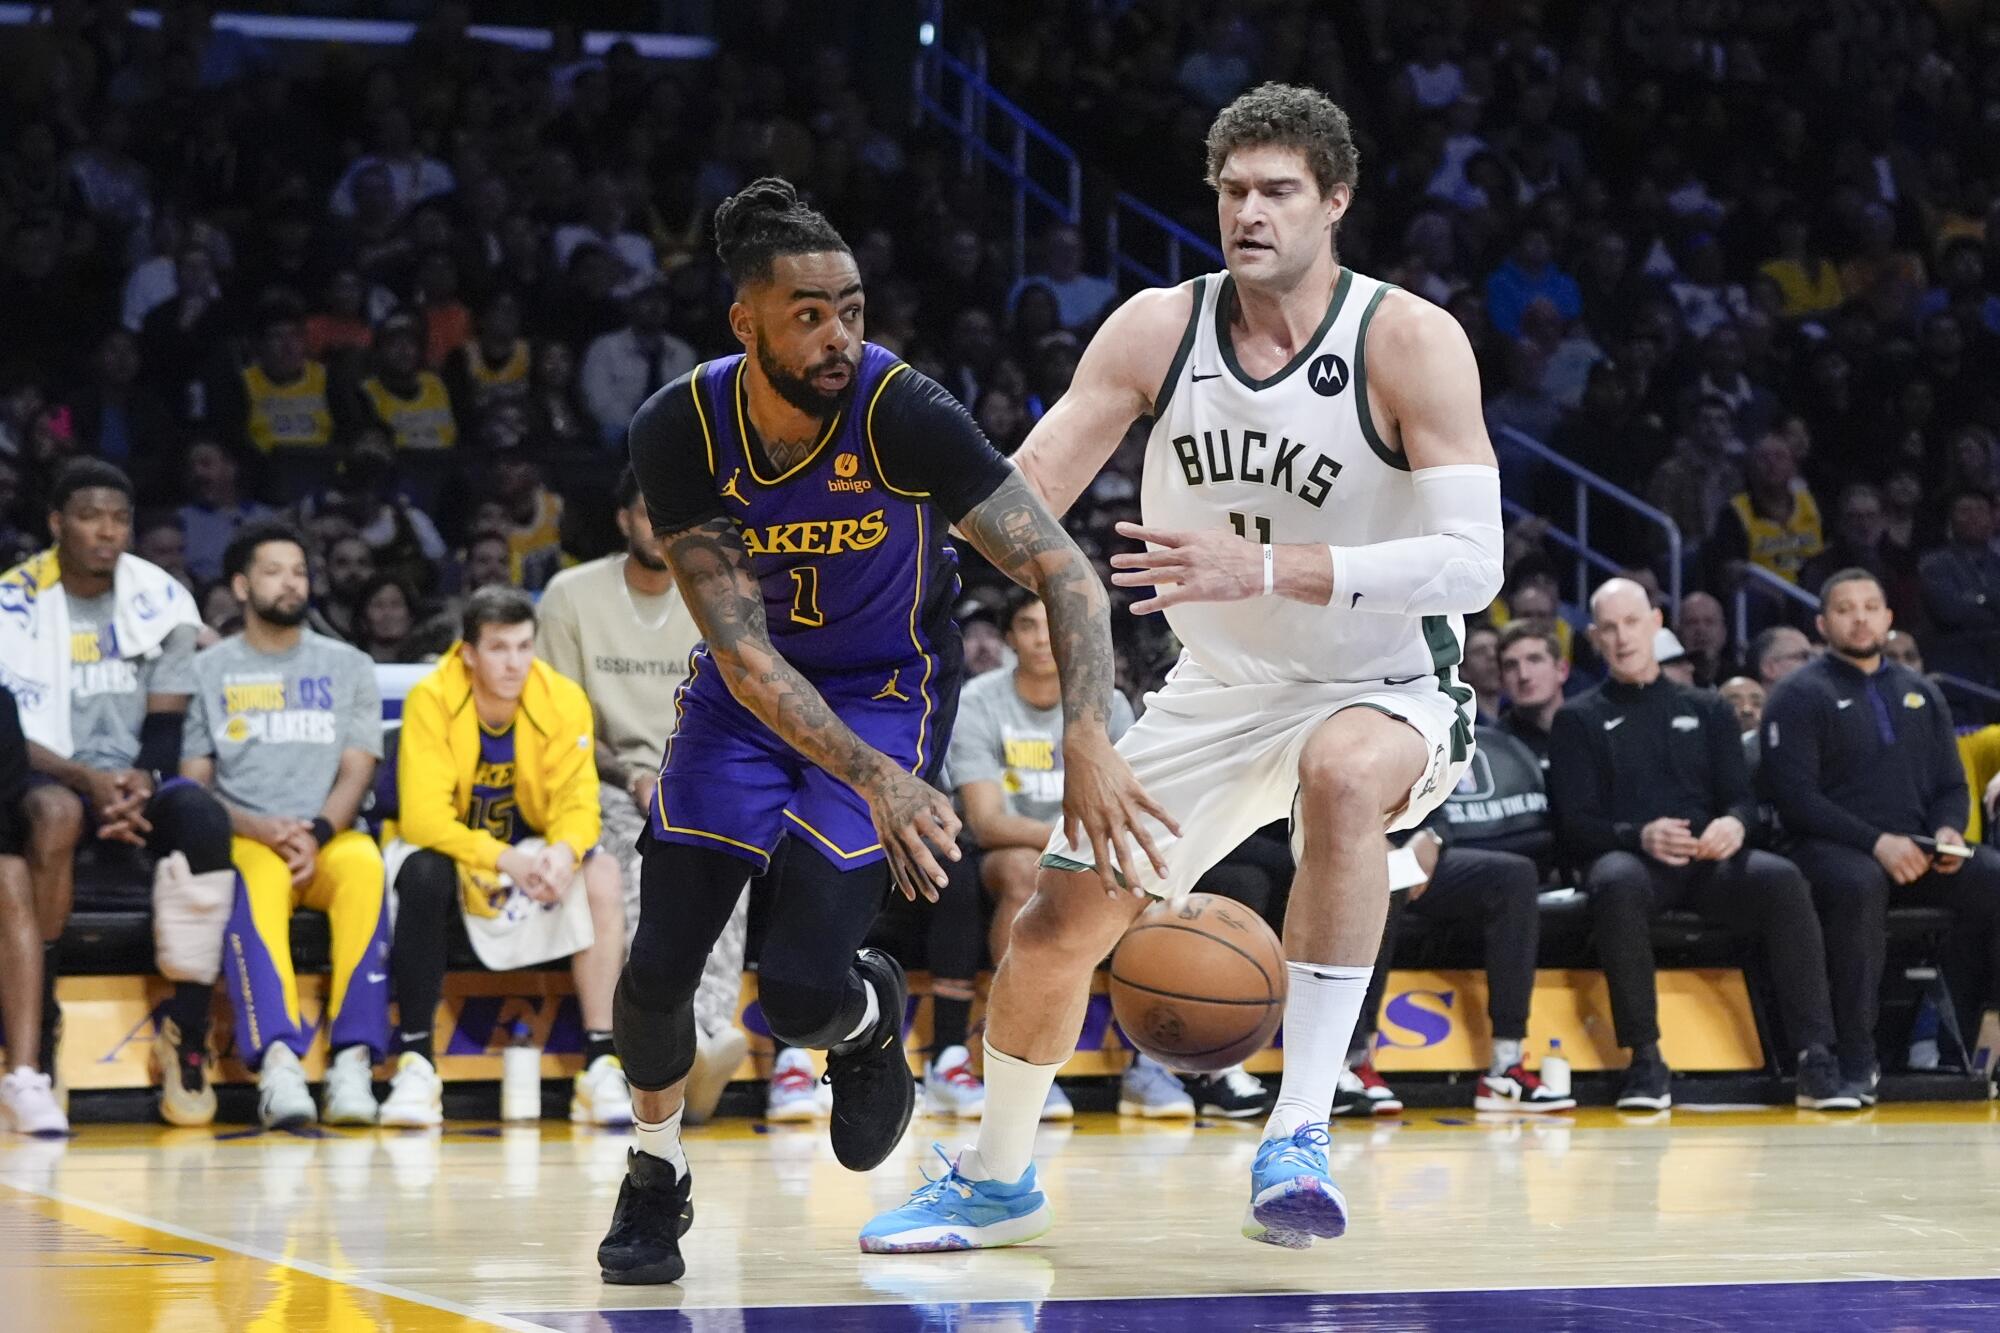 D'Angelo Russell scores 44 as Lakers edge Bucks